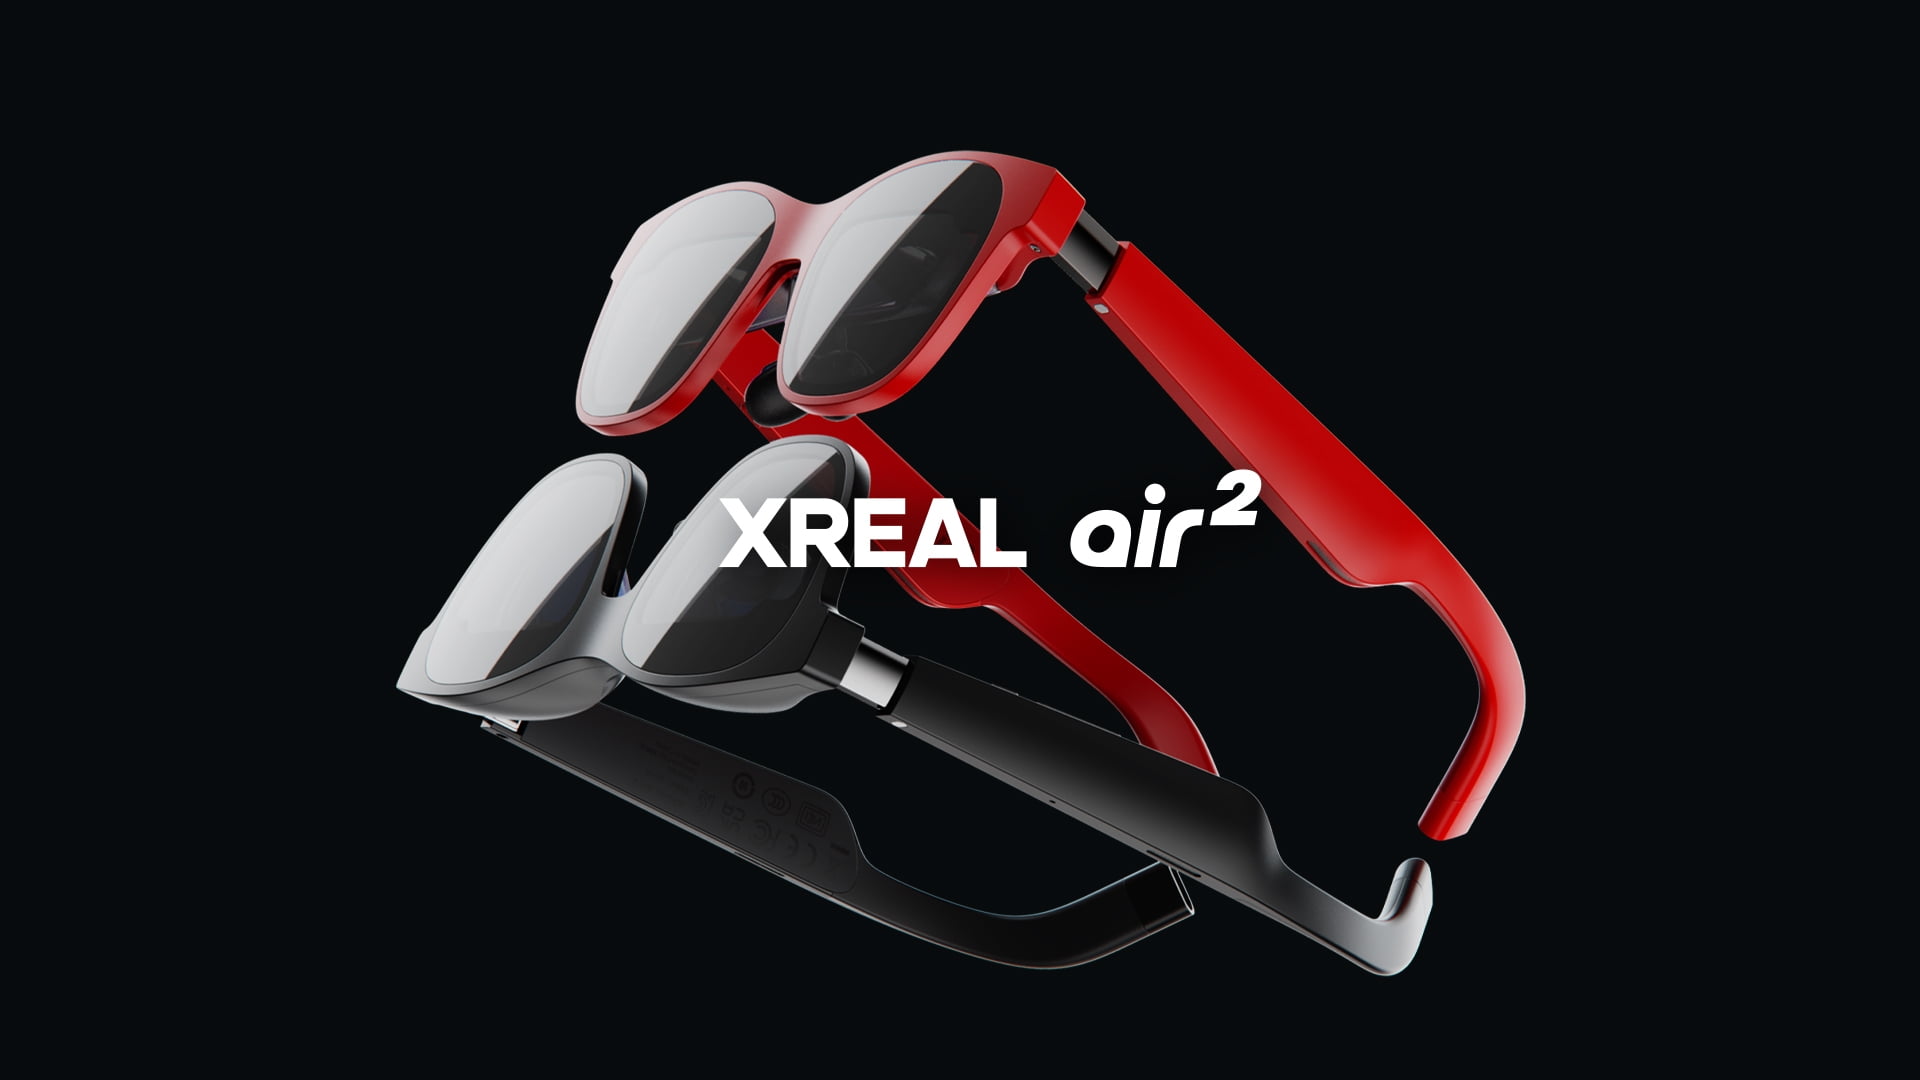 Xreal Air 2: release, price, resolution, everything you need to know